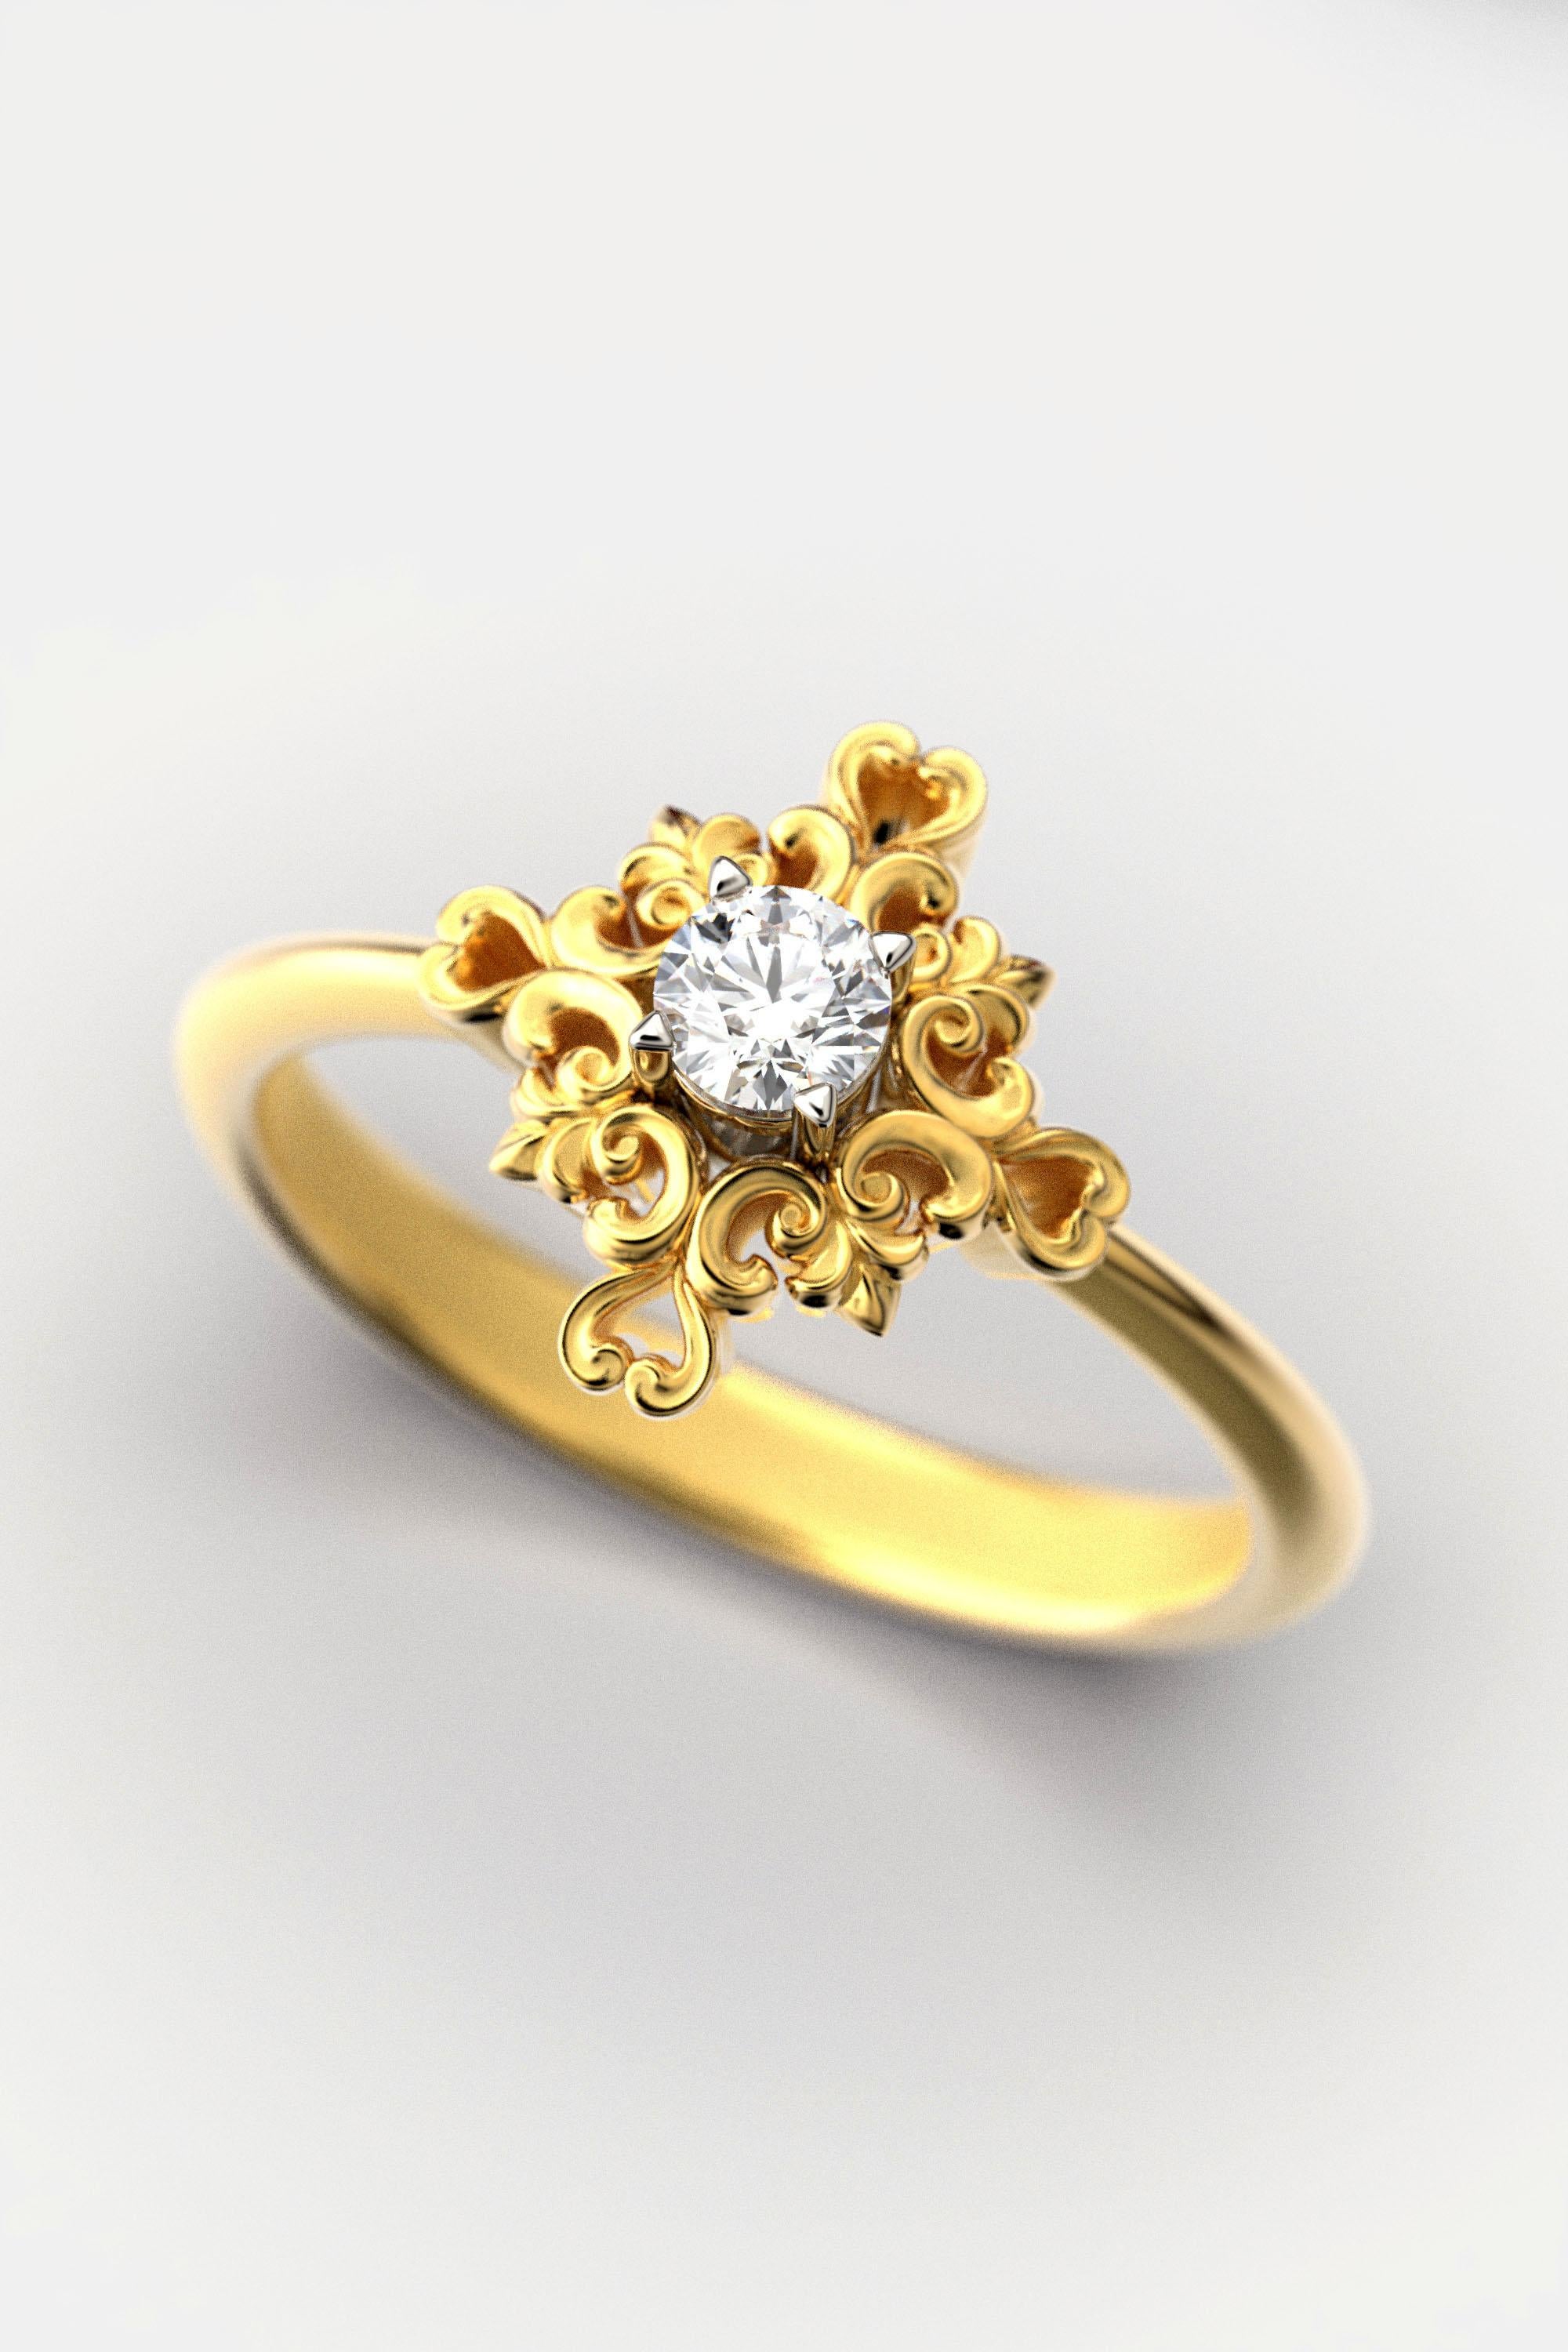 For Sale:  14k Gold Italian Diamond Engagement Ring with Baroque Setting 3